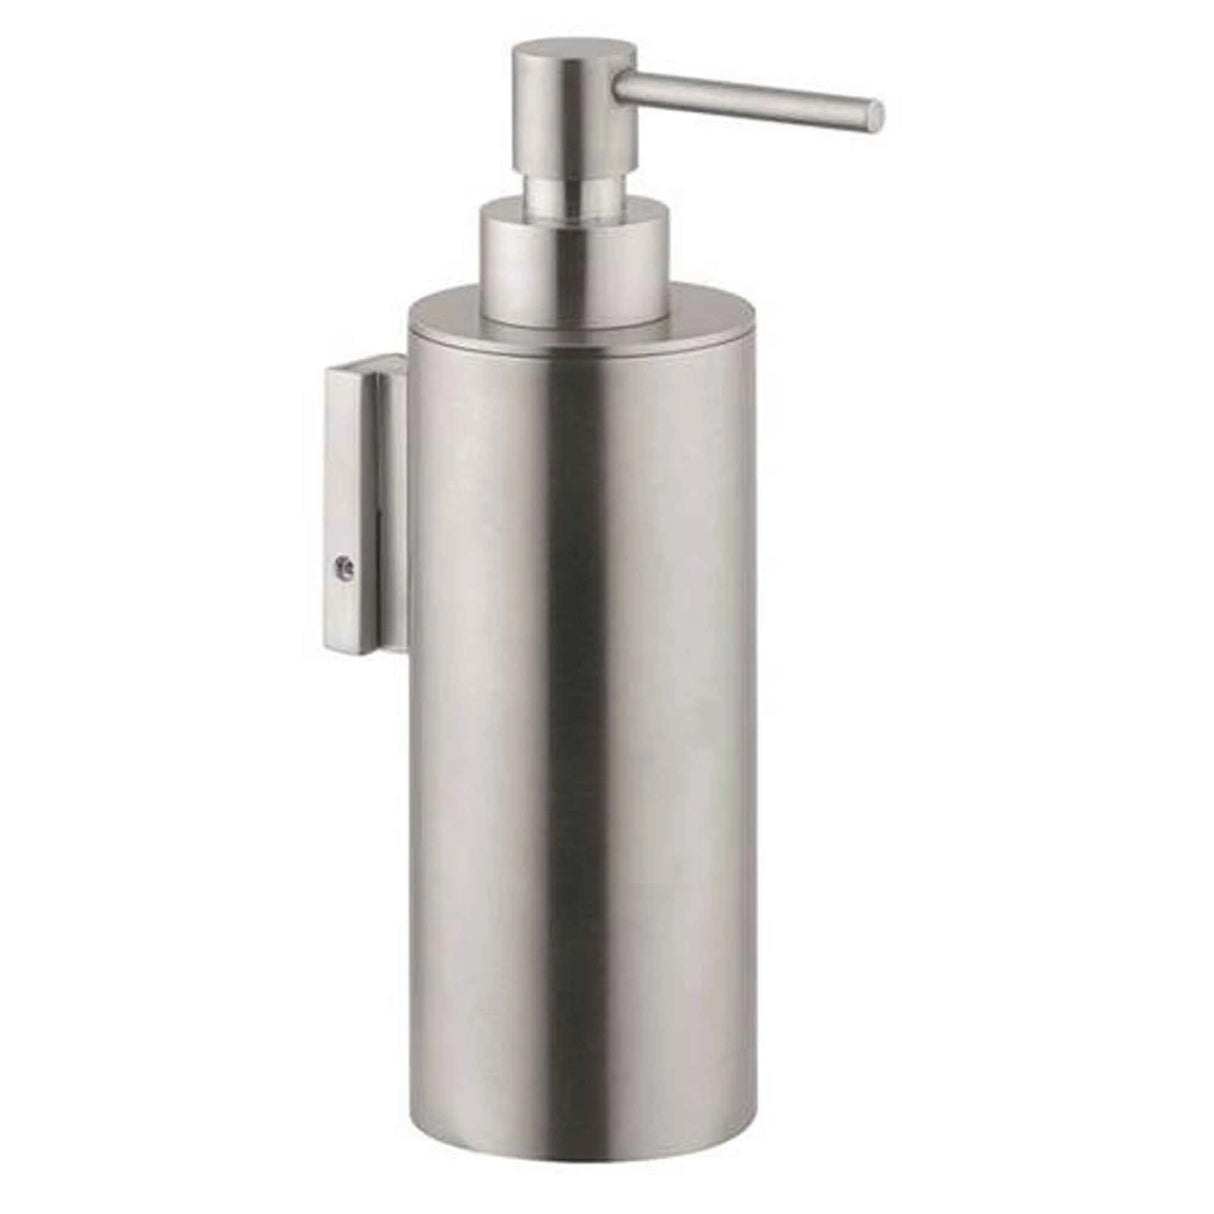 BC600 / BC600B Dolphin 300ML Liquid Soap 316 Stainless Steel Wall Mounted Soap Dispenser